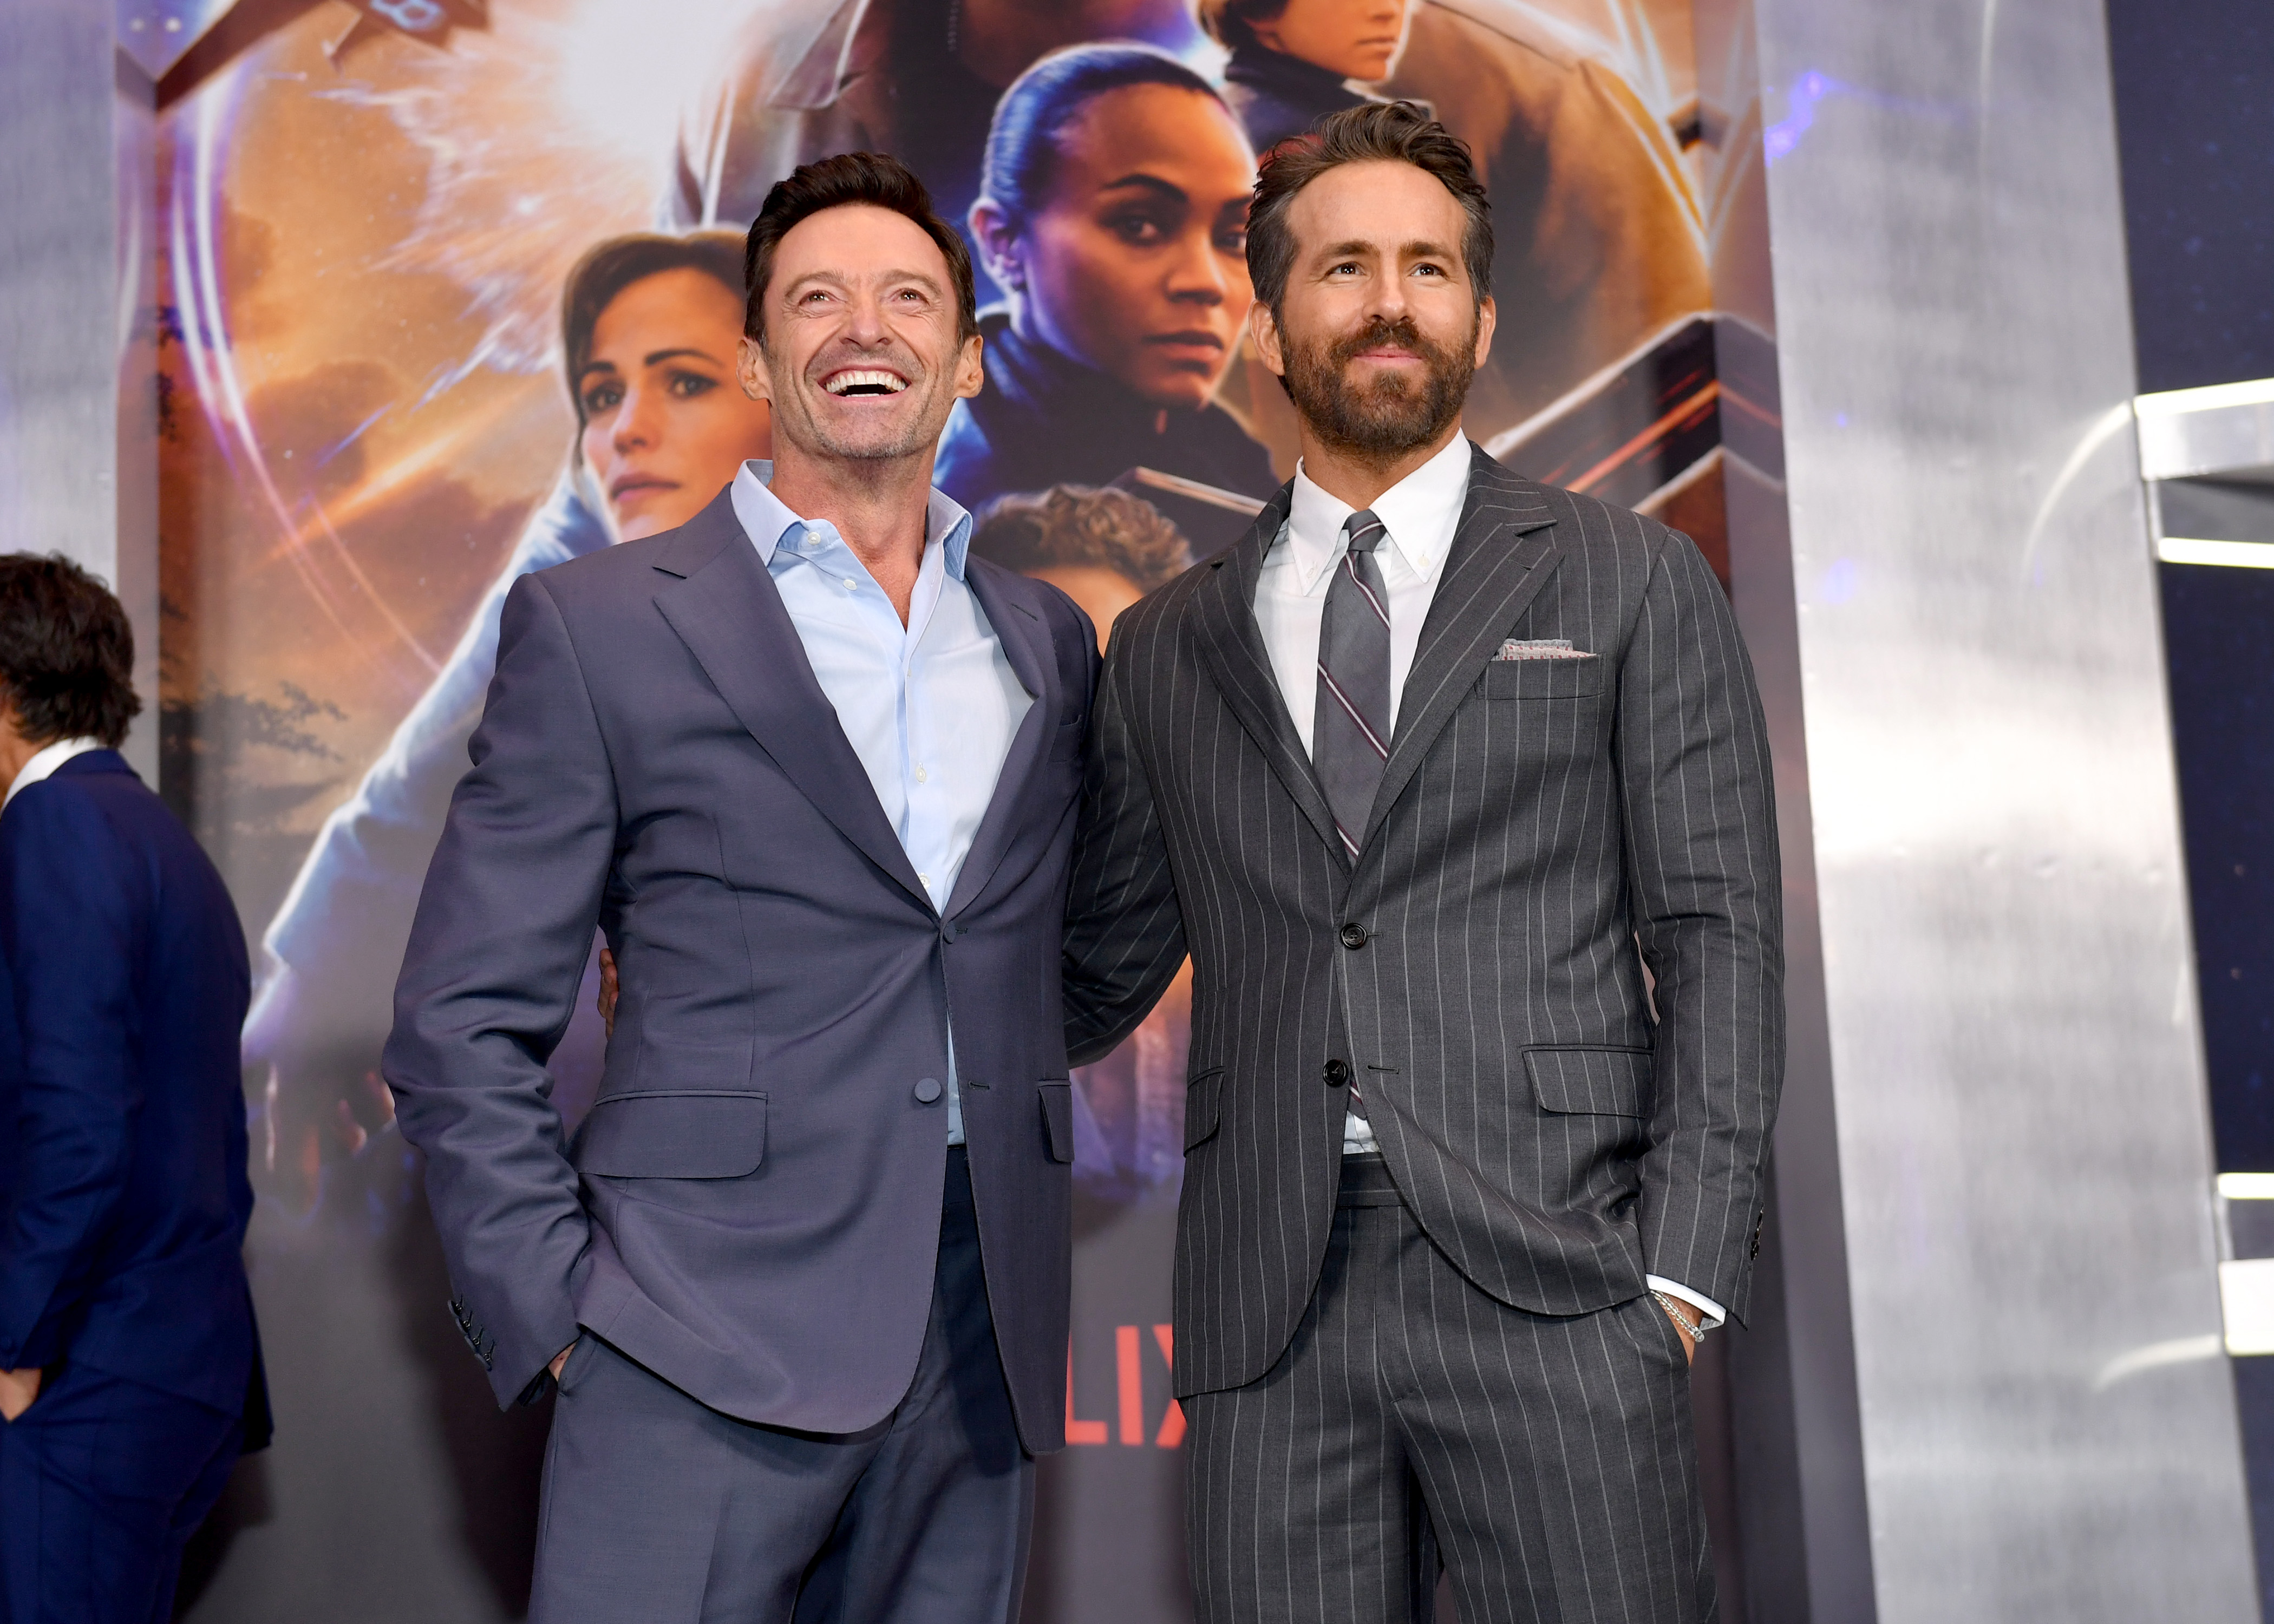 Hugh Jackman and Ryan Reynolds at the world premiere of "The Adam Project" in New York City on February 28, 2022 | Source: Getty Images